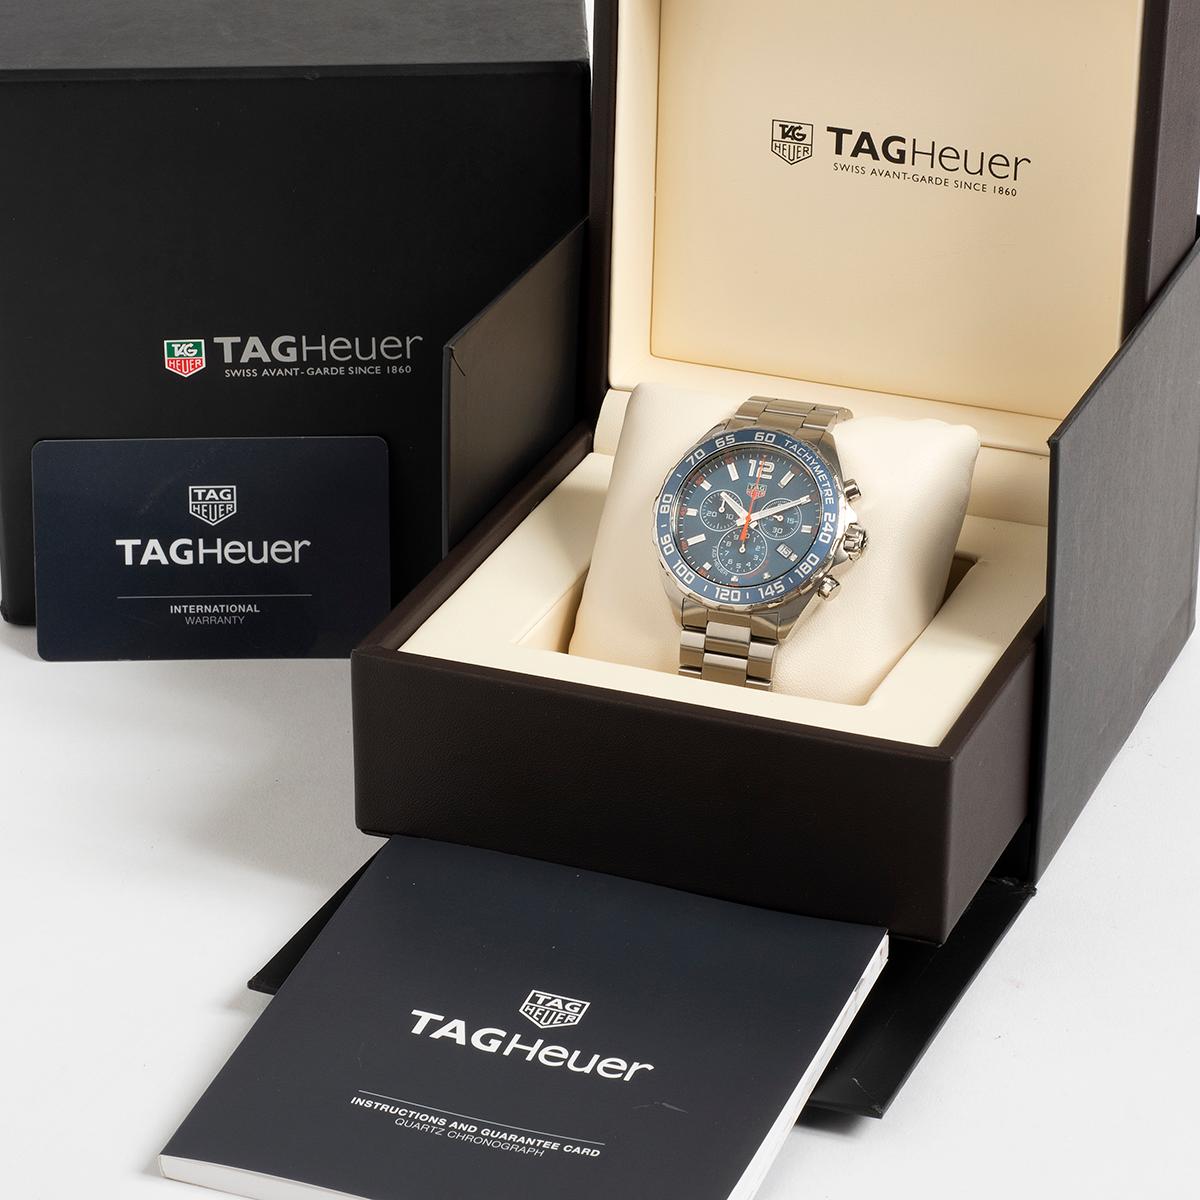 Our Tag Heuer Formula 1 chronograph, reference CAZ1014, features a 43mm stainless steel case and stainless steel bracelet, this example has the attractive racing blue dial. Presented in excellent condition, with only light signs of use overall, this